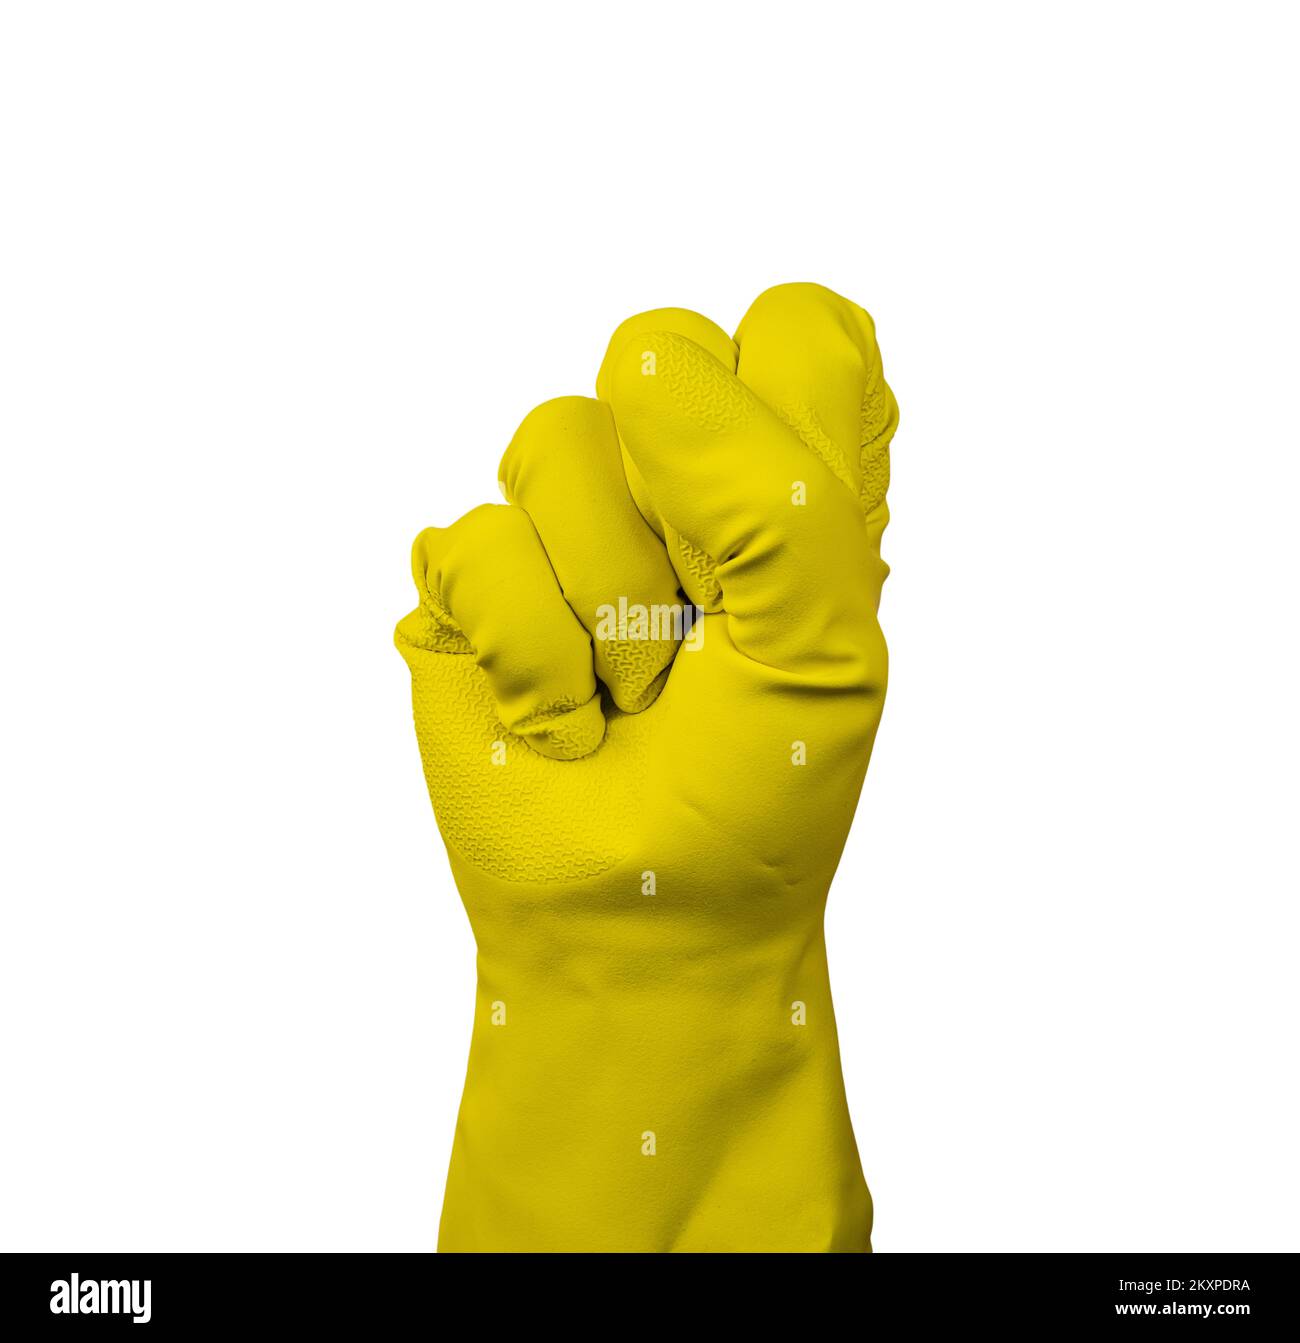 the fist from a hand wearing a yellow rubber glove Stock Photo